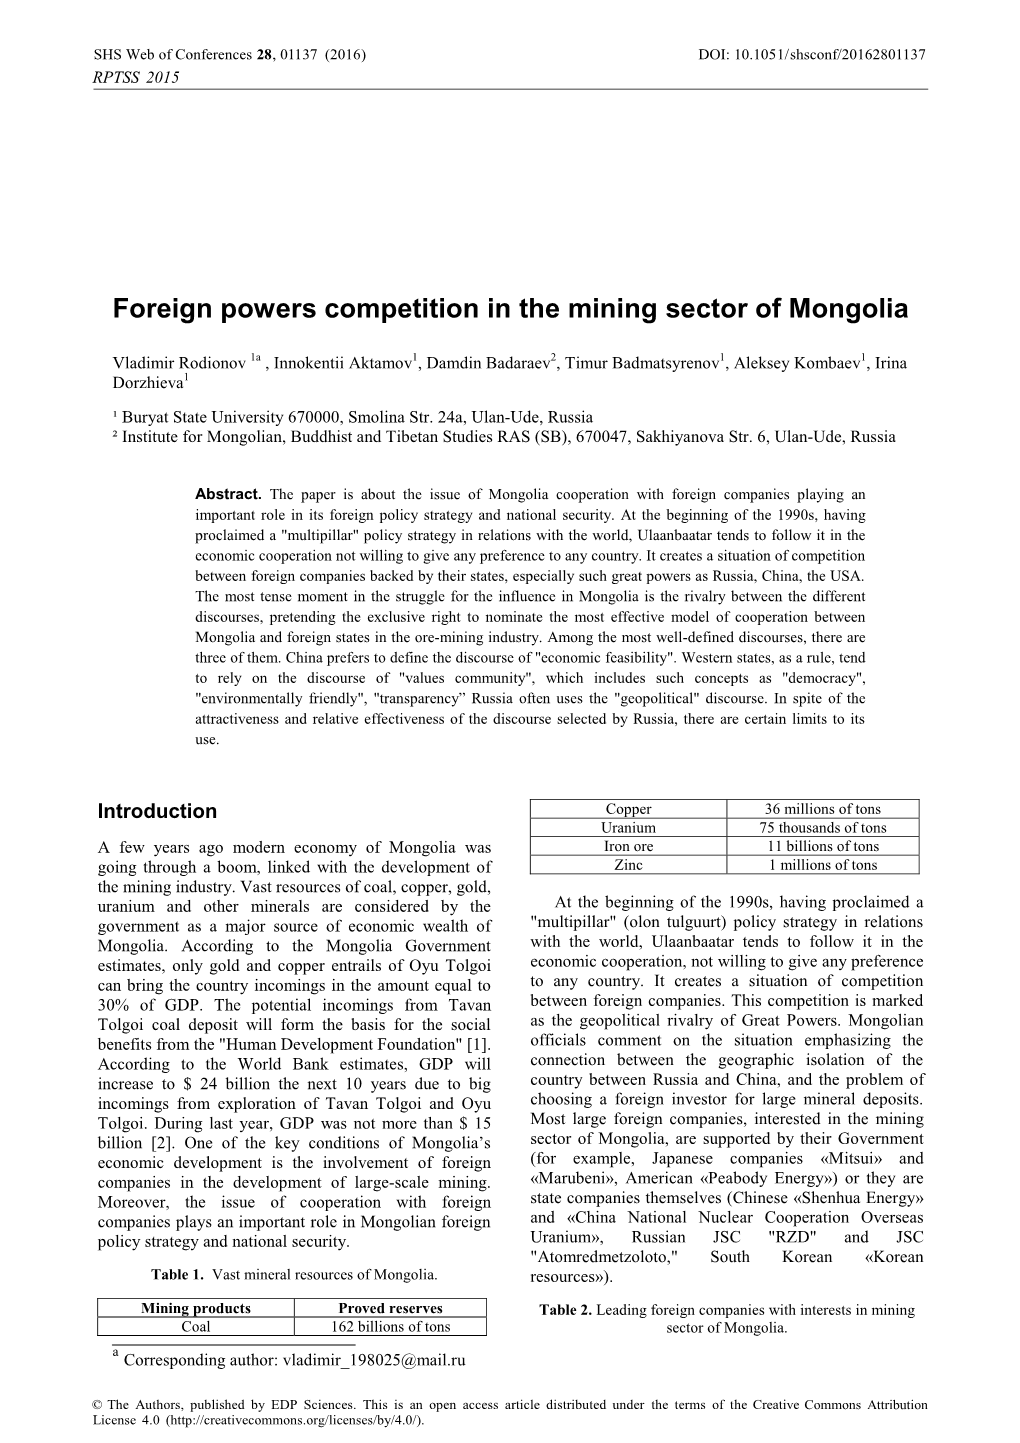 Foreign Powers Competition in the Mining Sector of Mongolia